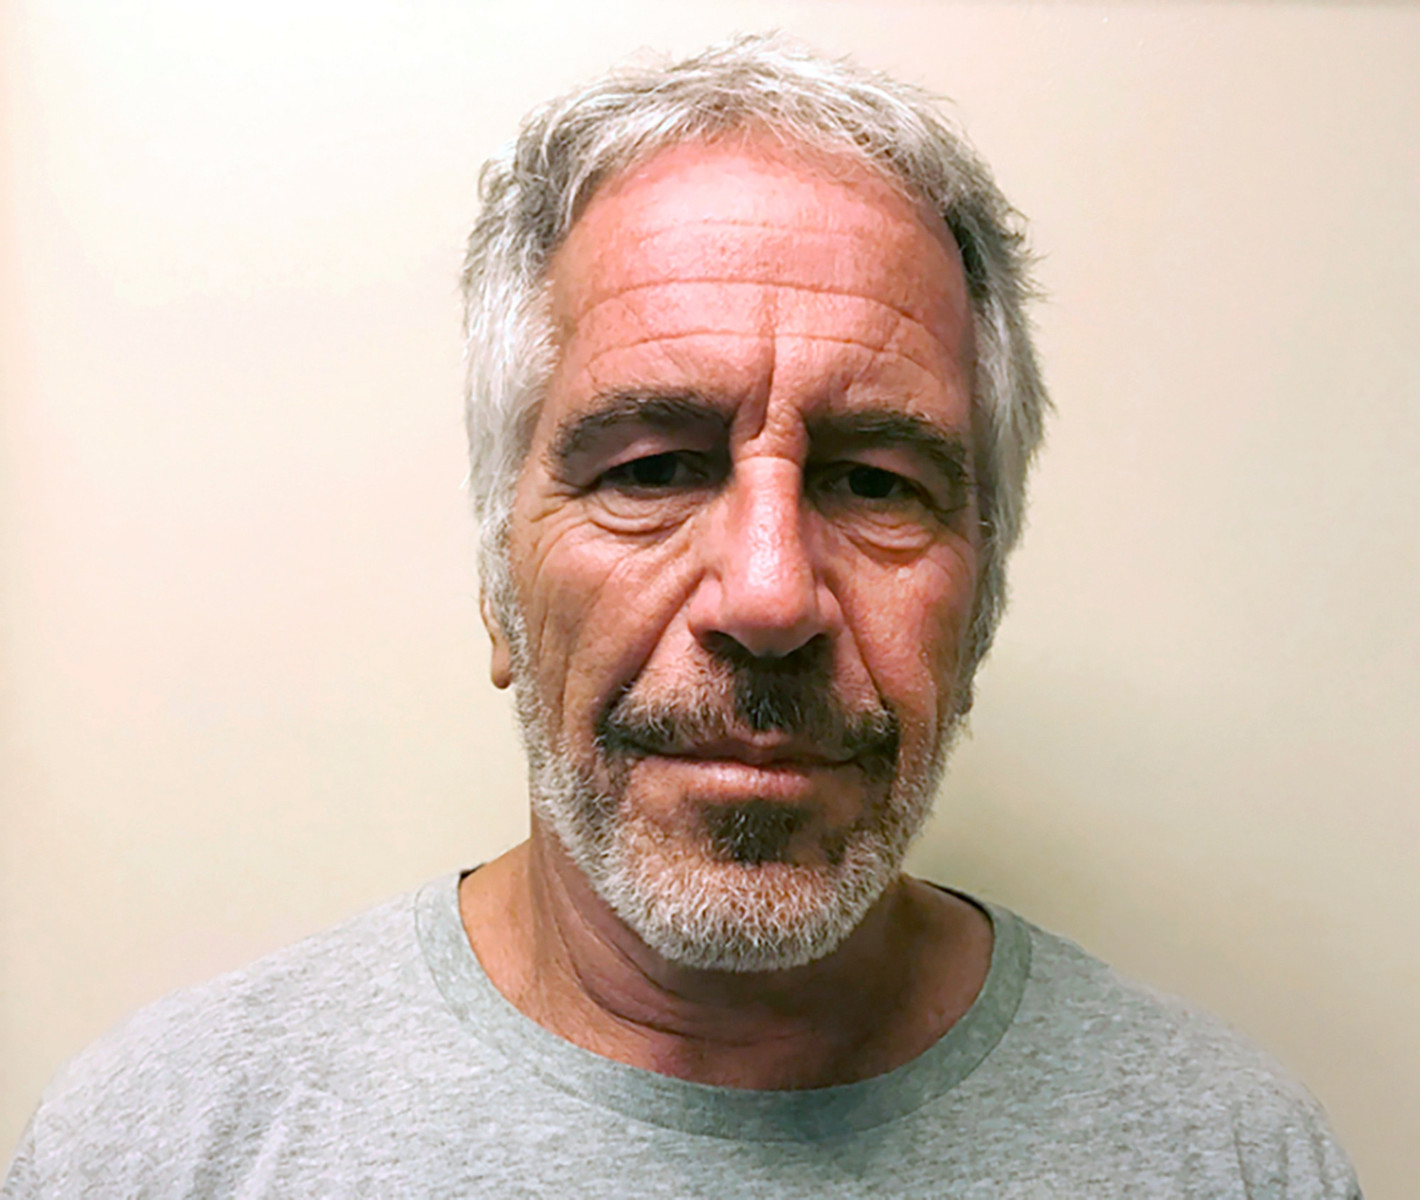 Evil paedophile Jeffrey Epstein took his own life in prison last summer and has been linked to Prince Andrew